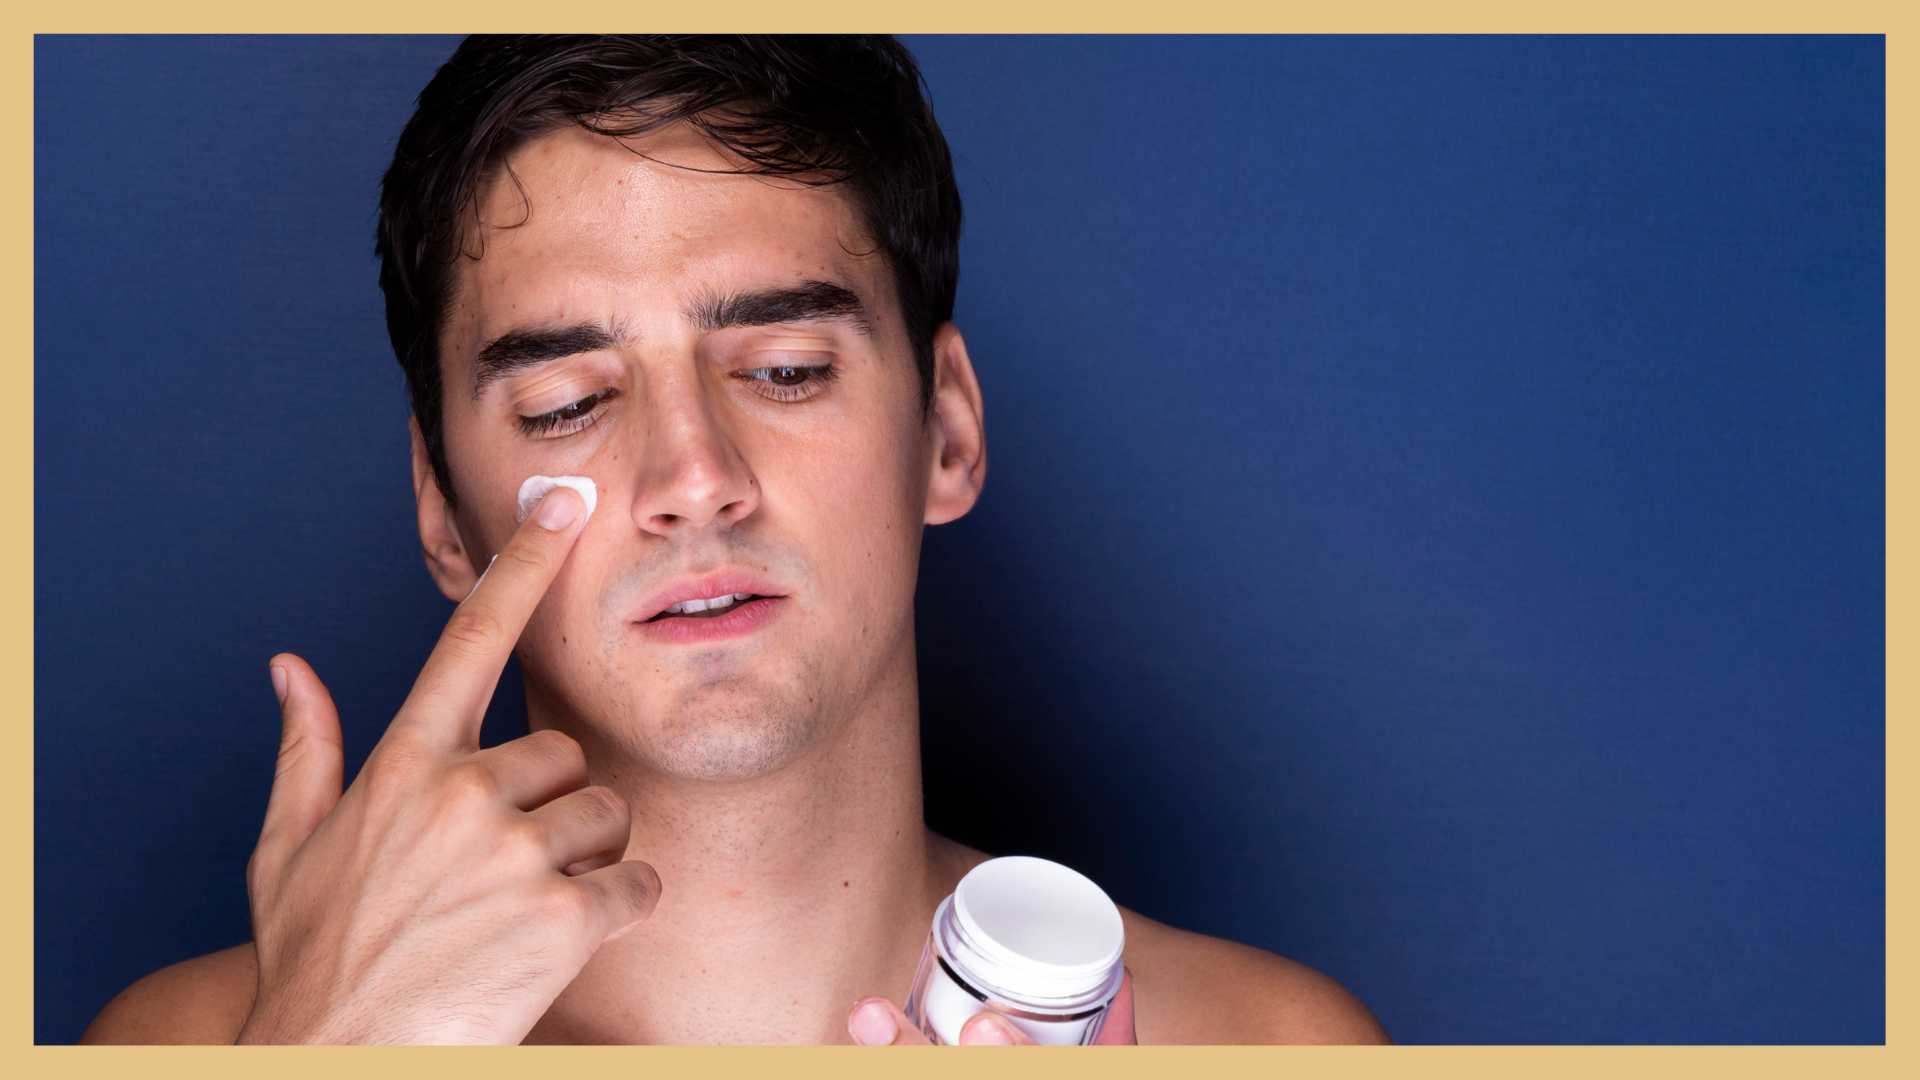 5 Common Men's Skincare Mistakes and How to Fix Them